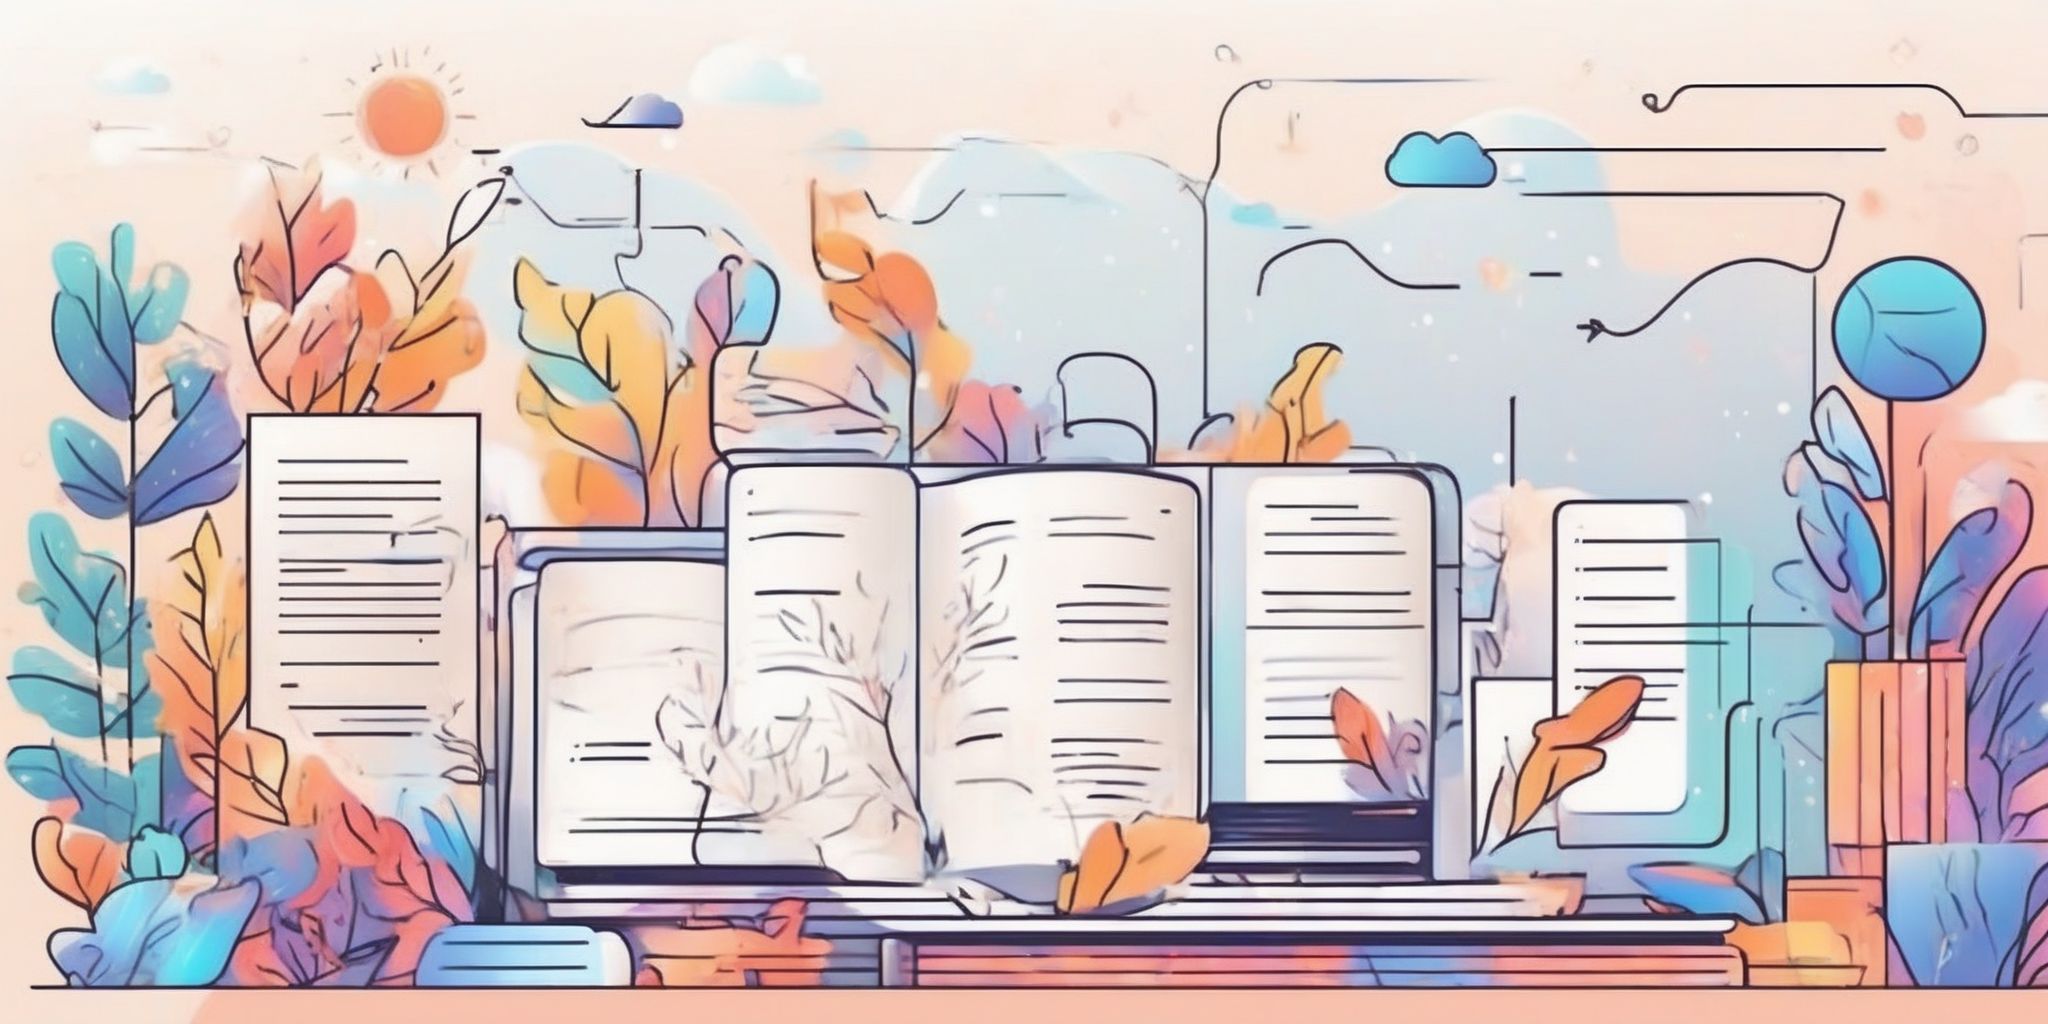 online journal in illustration style with gradients and white background